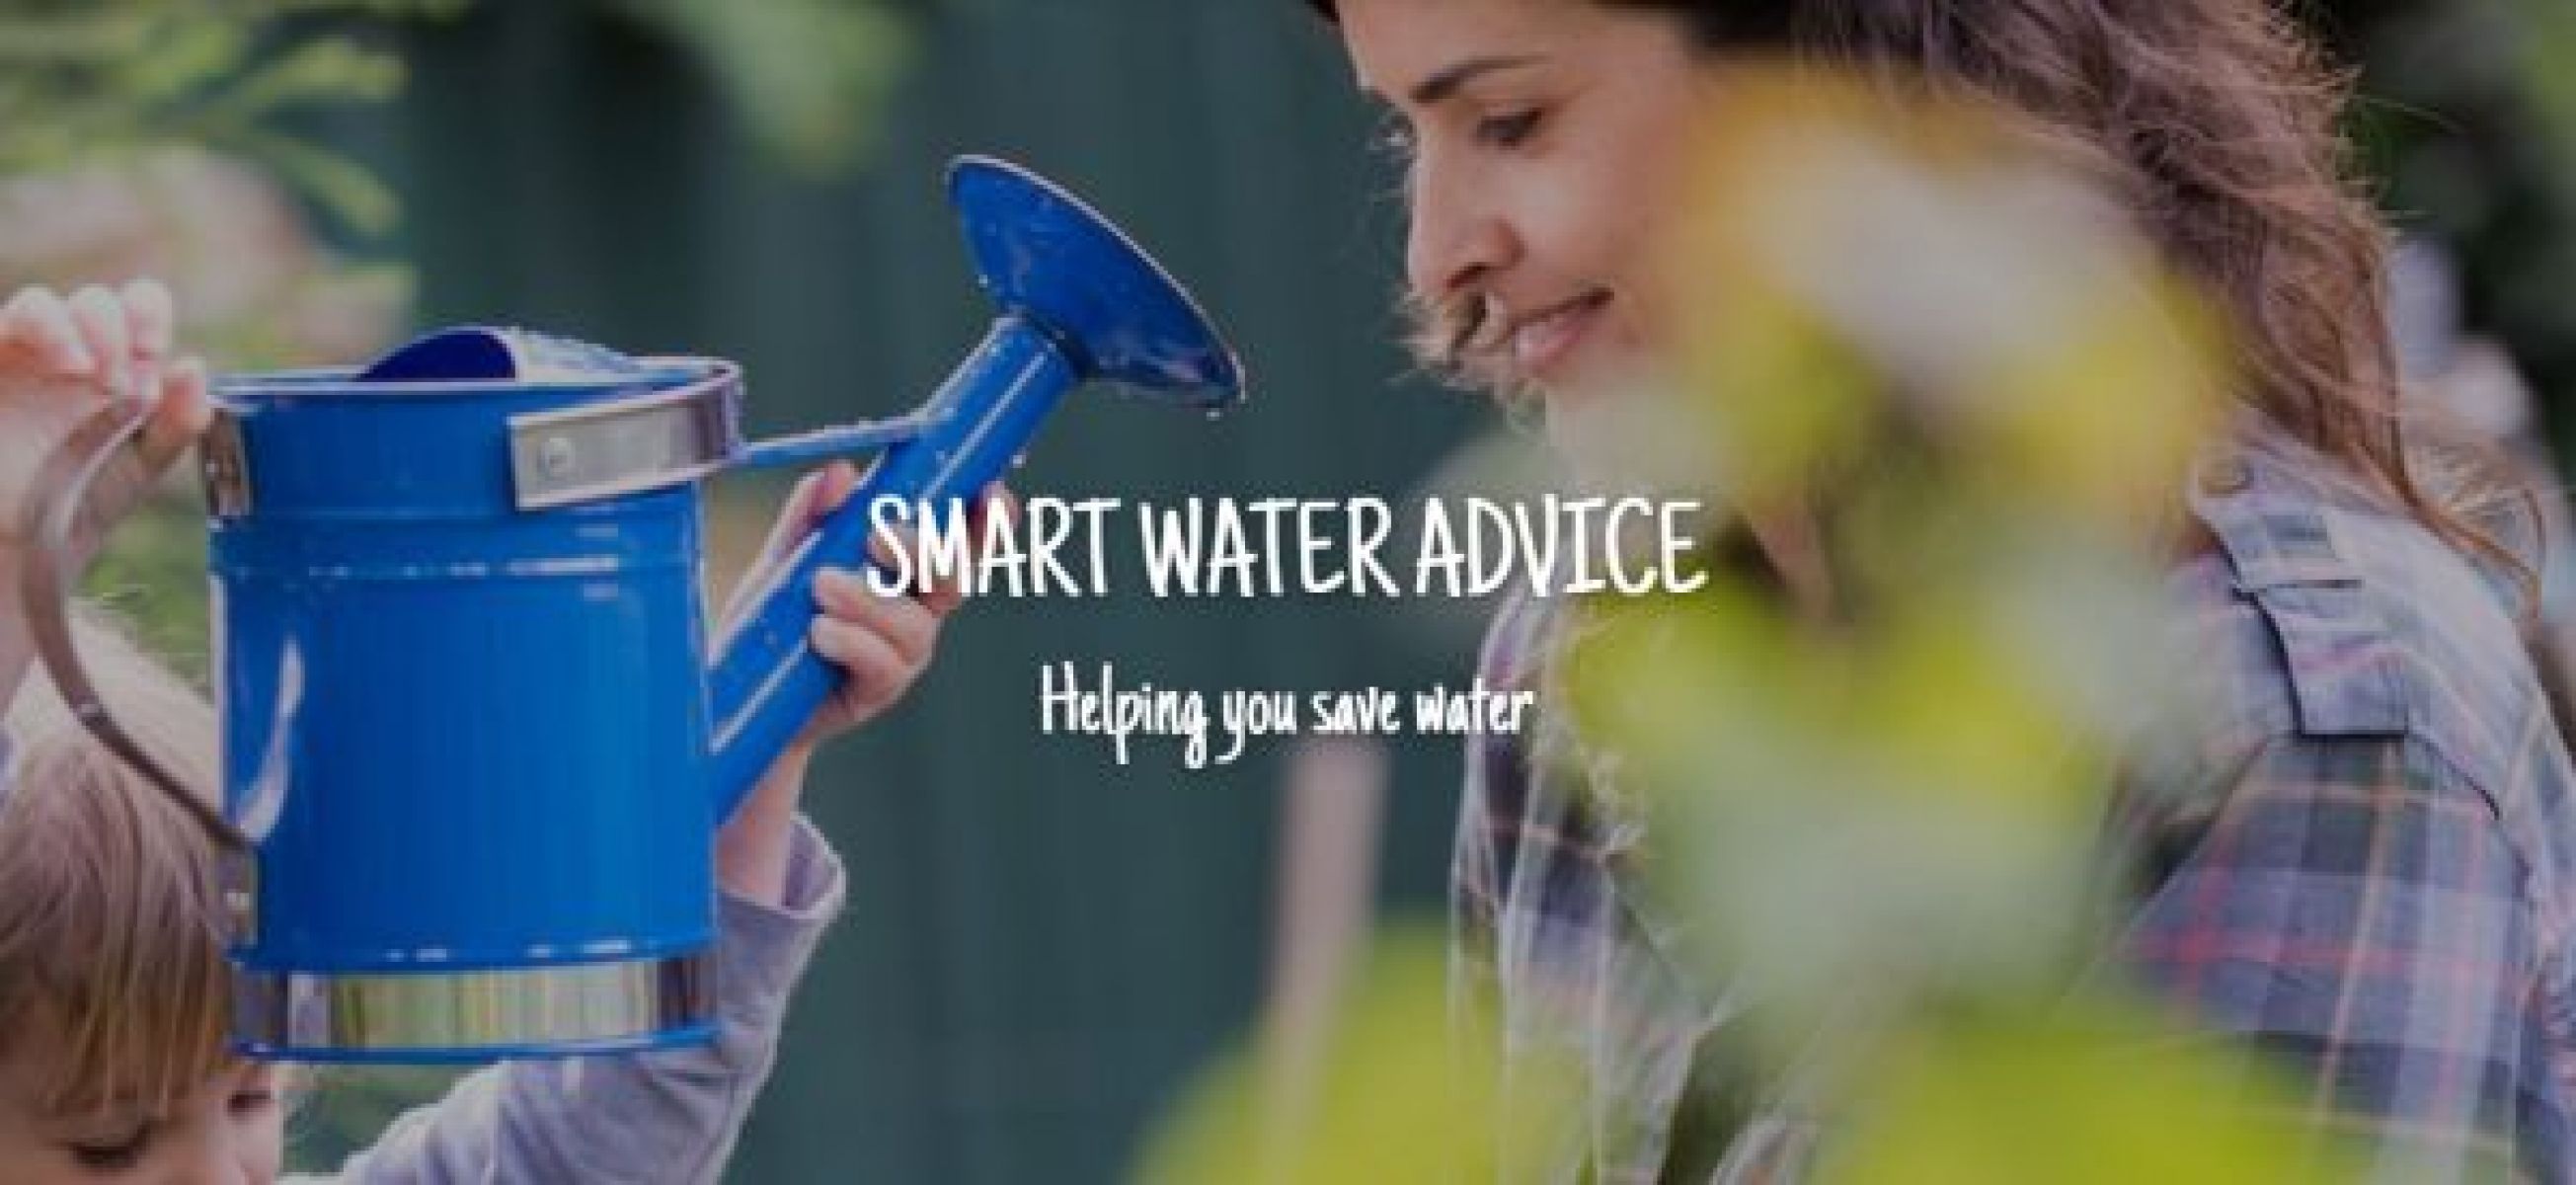 Smart water advice - Helping you save water. A person looking at a blue watercan that a child is holding up.